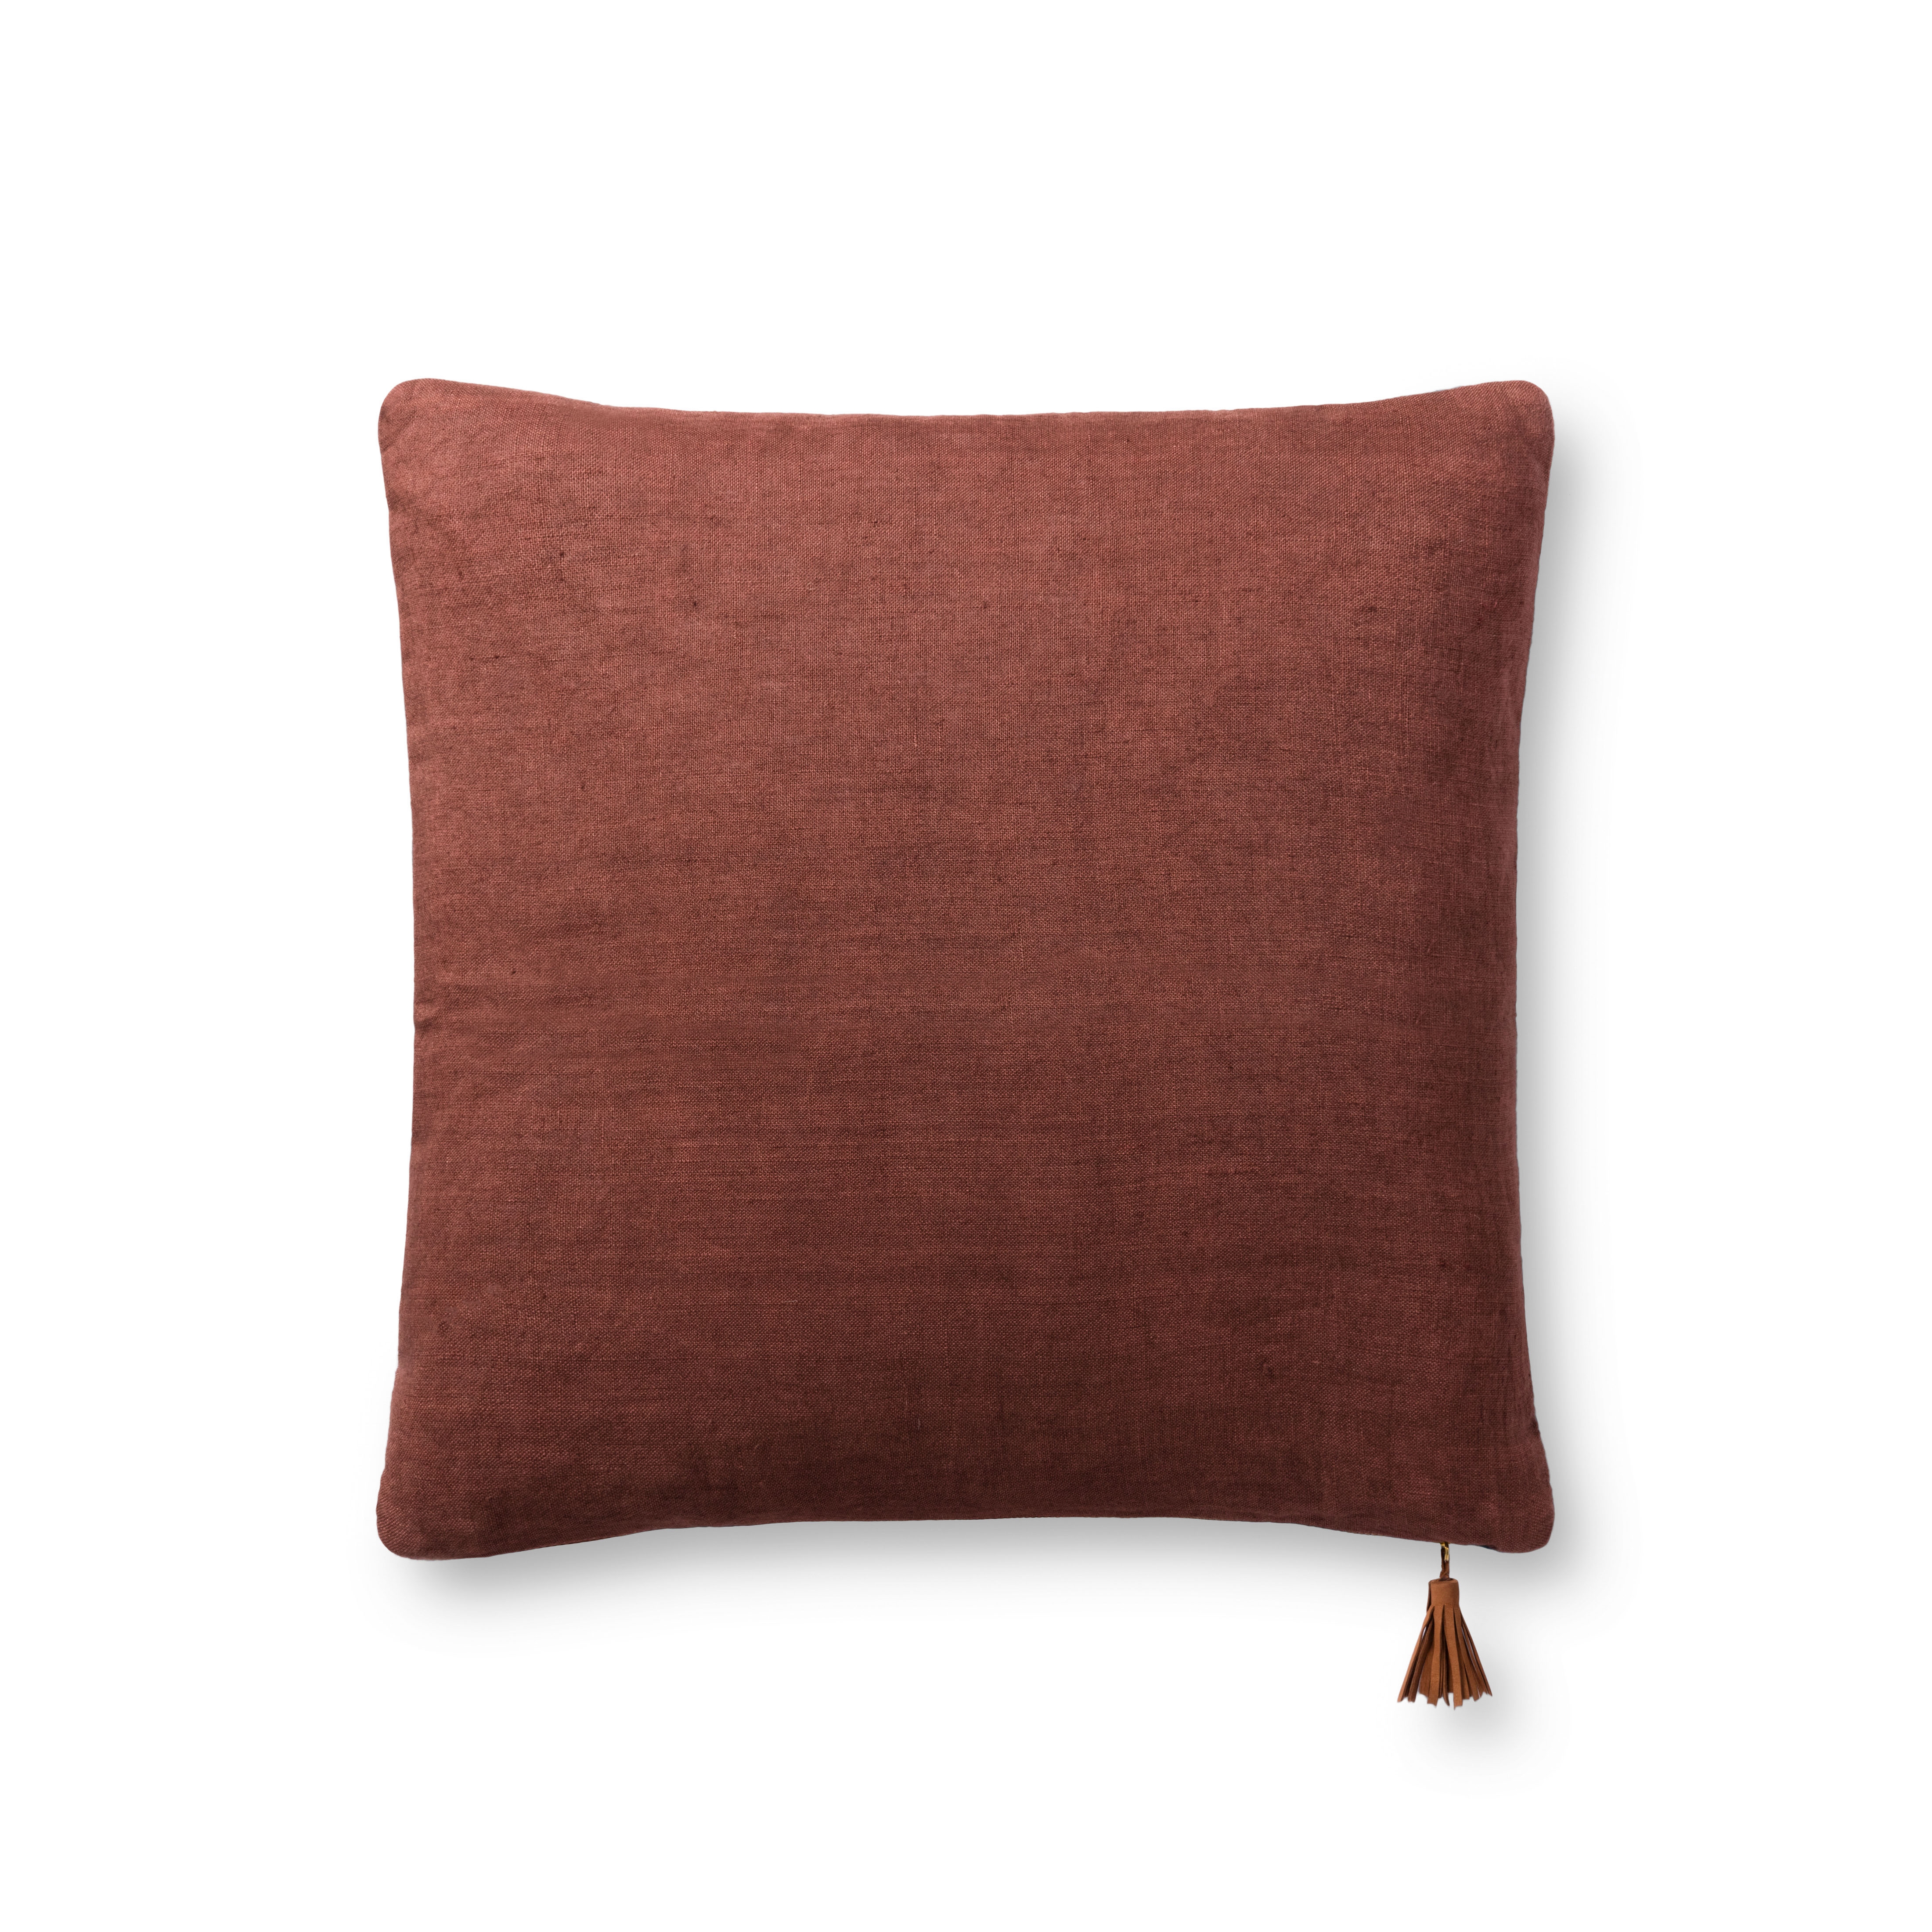 PILLOWS P1153 NAVY / COFFEE 18" x 18" Cover w/Down - Image 1